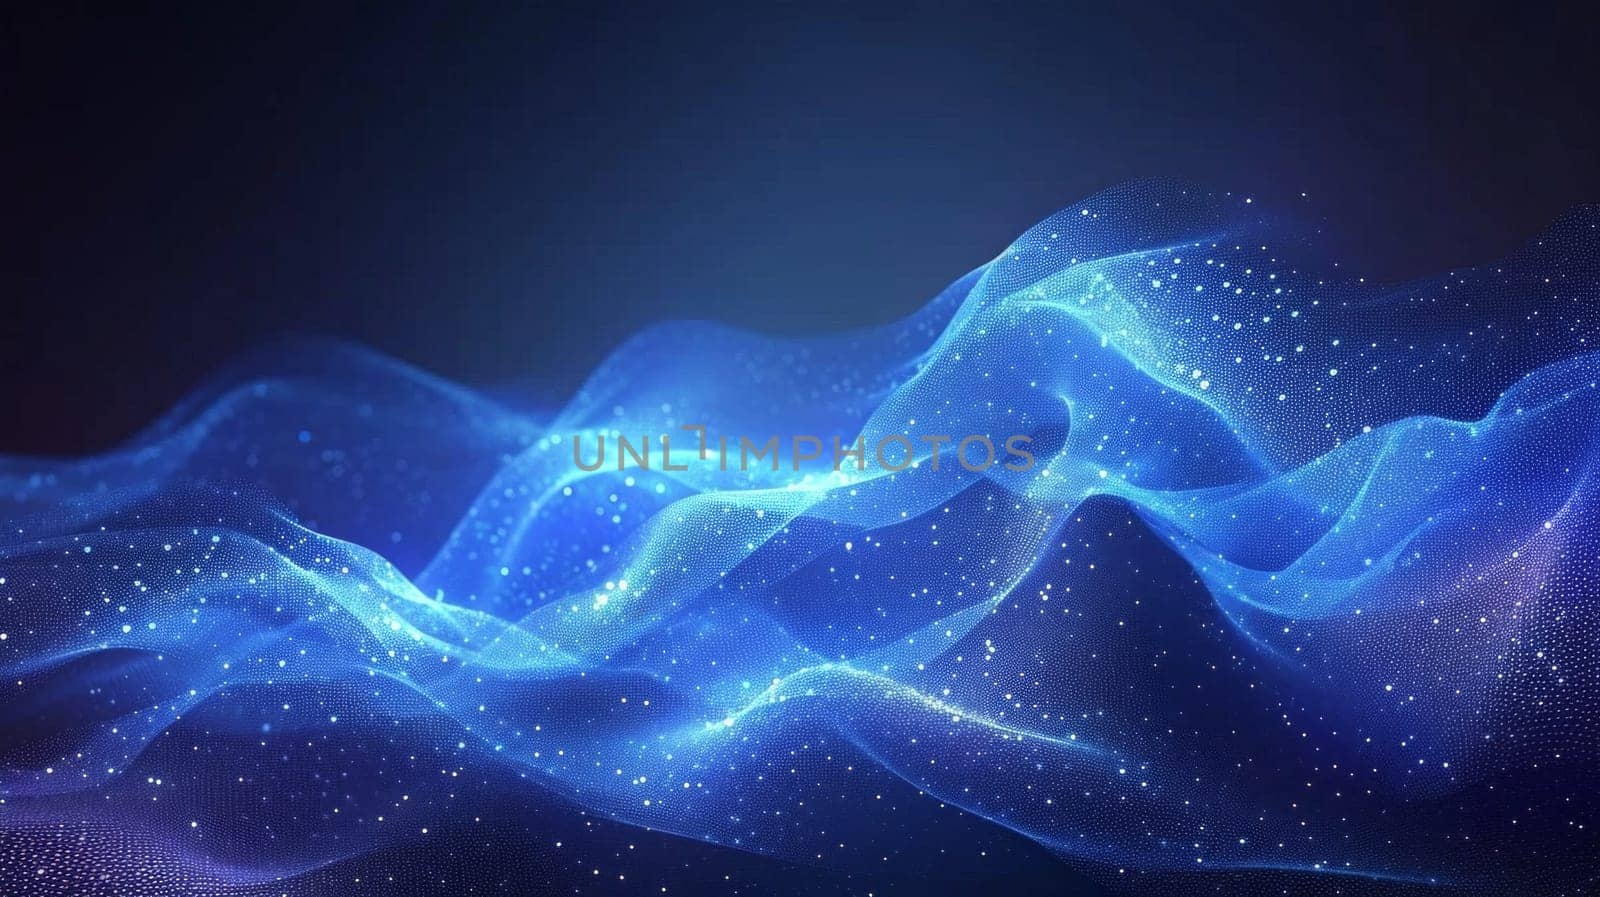 Abstract Mesh Particles Blue Technology Background. Big Data, Computer Science, Connection, Universe Wallpaper Design by iliris